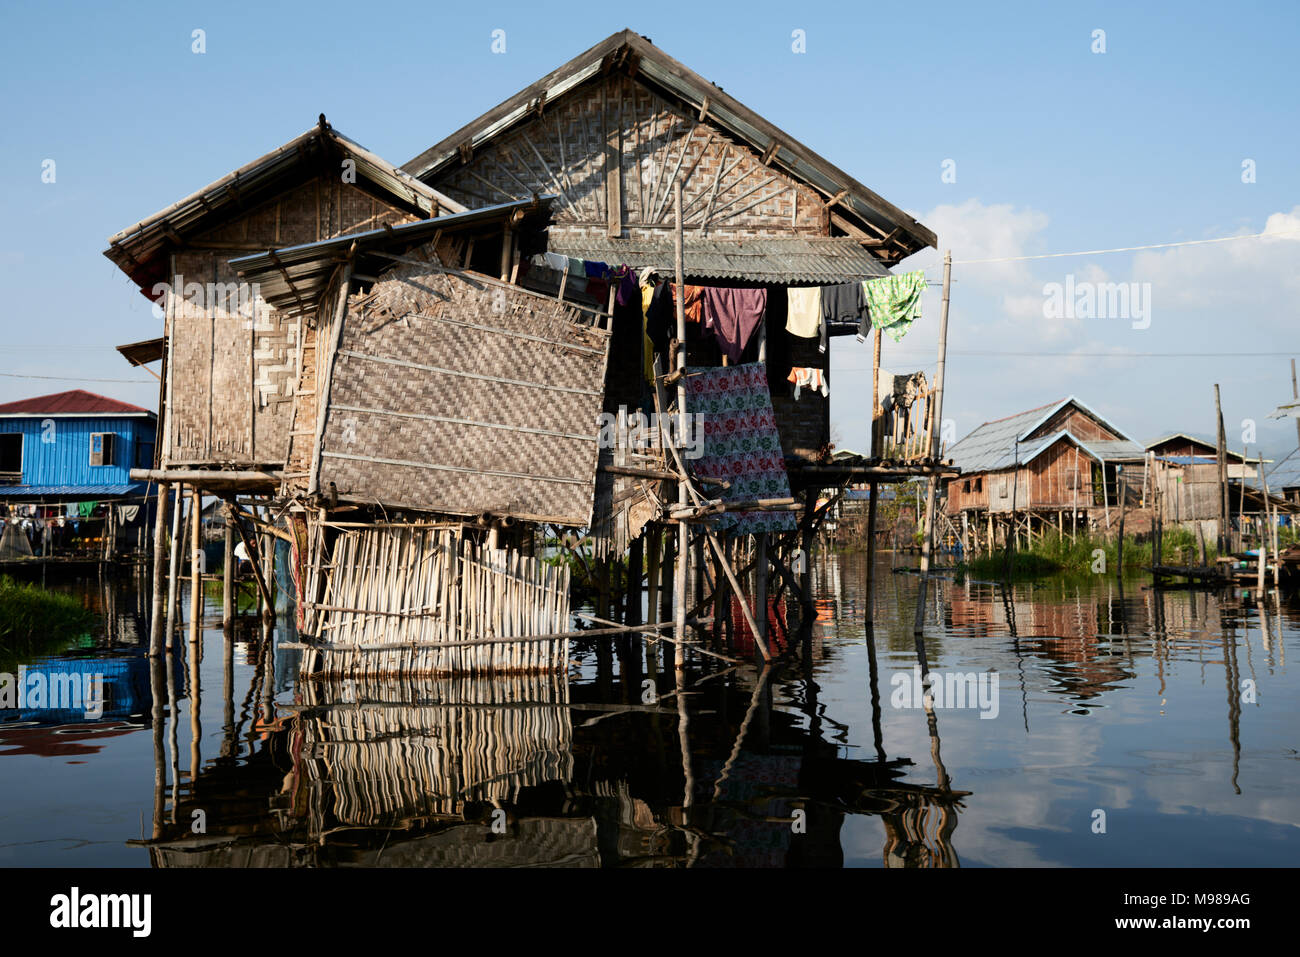 Floating house at sunset in Inle Lake, Myanmar. Stock Photo